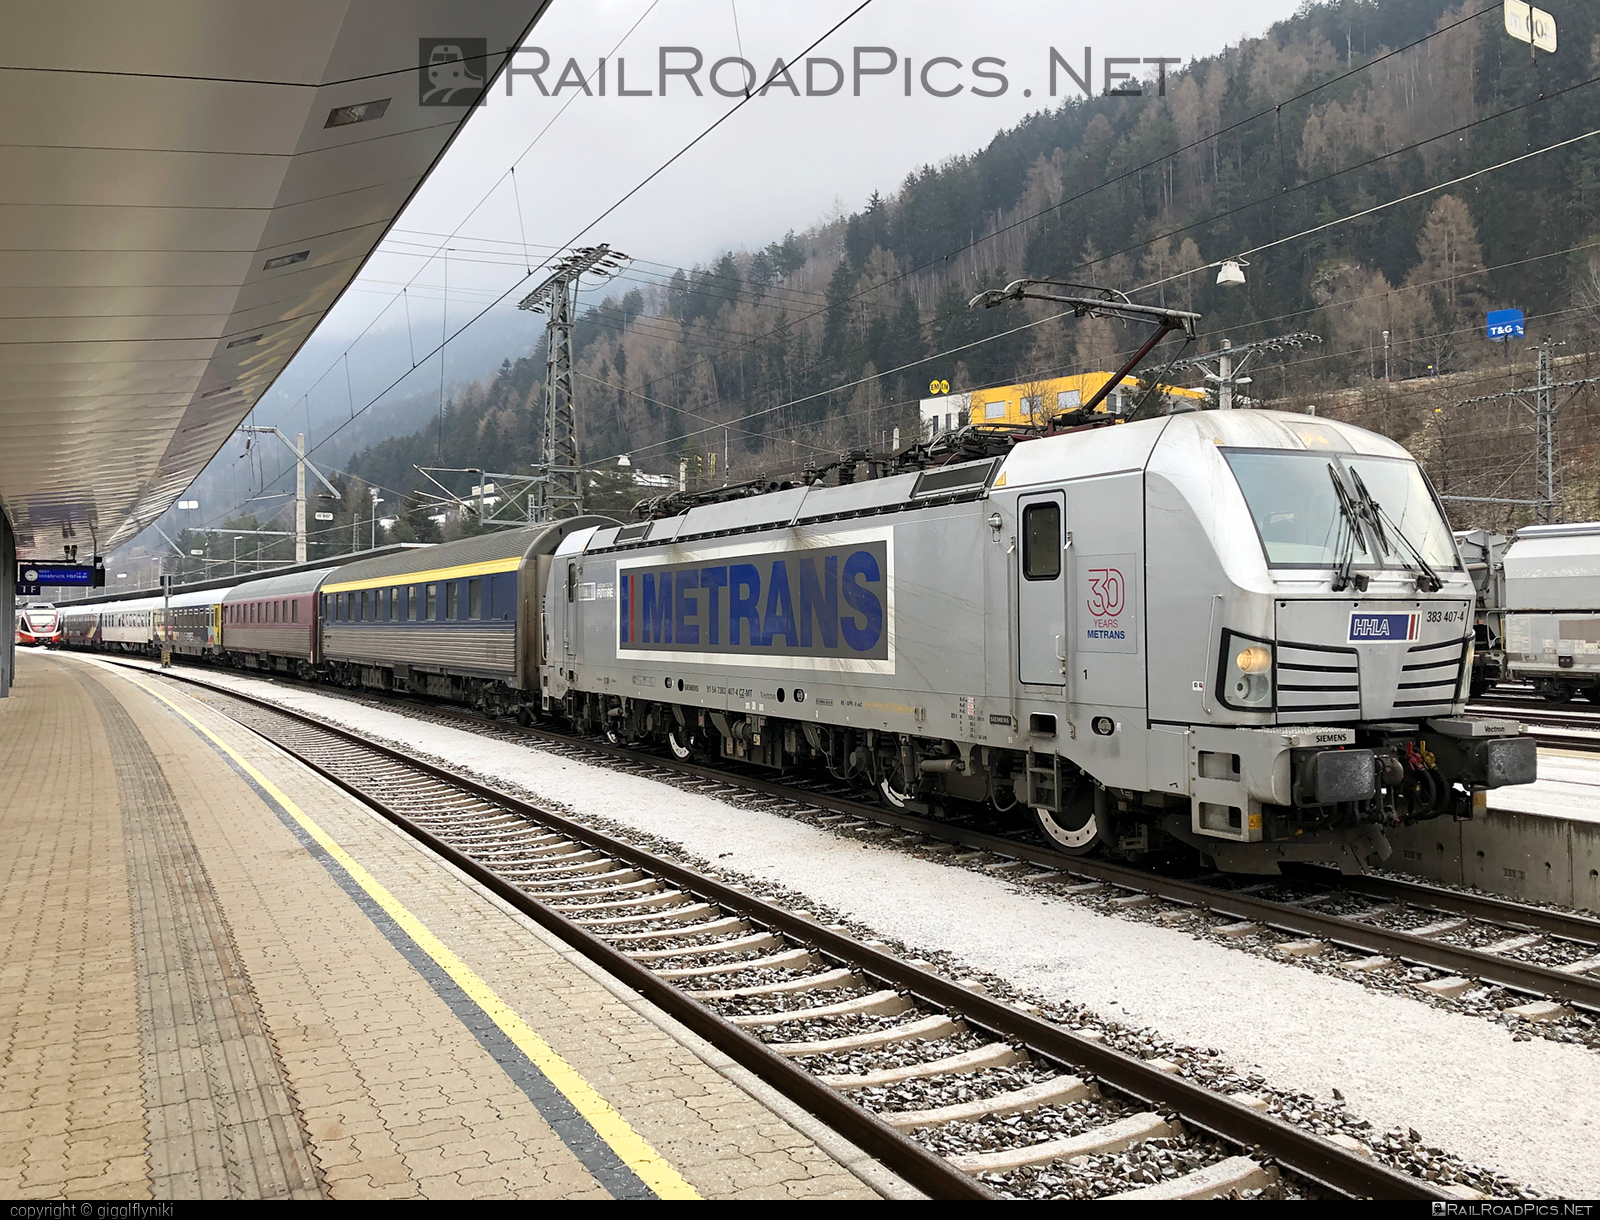 Siemens Vectron MS - 383 407-4 operated by METRANS, a.s. #hhla #metrans #siemens #siemensVectron #siemensVectronMS #urlaubsexpress #vectron #vectronMS